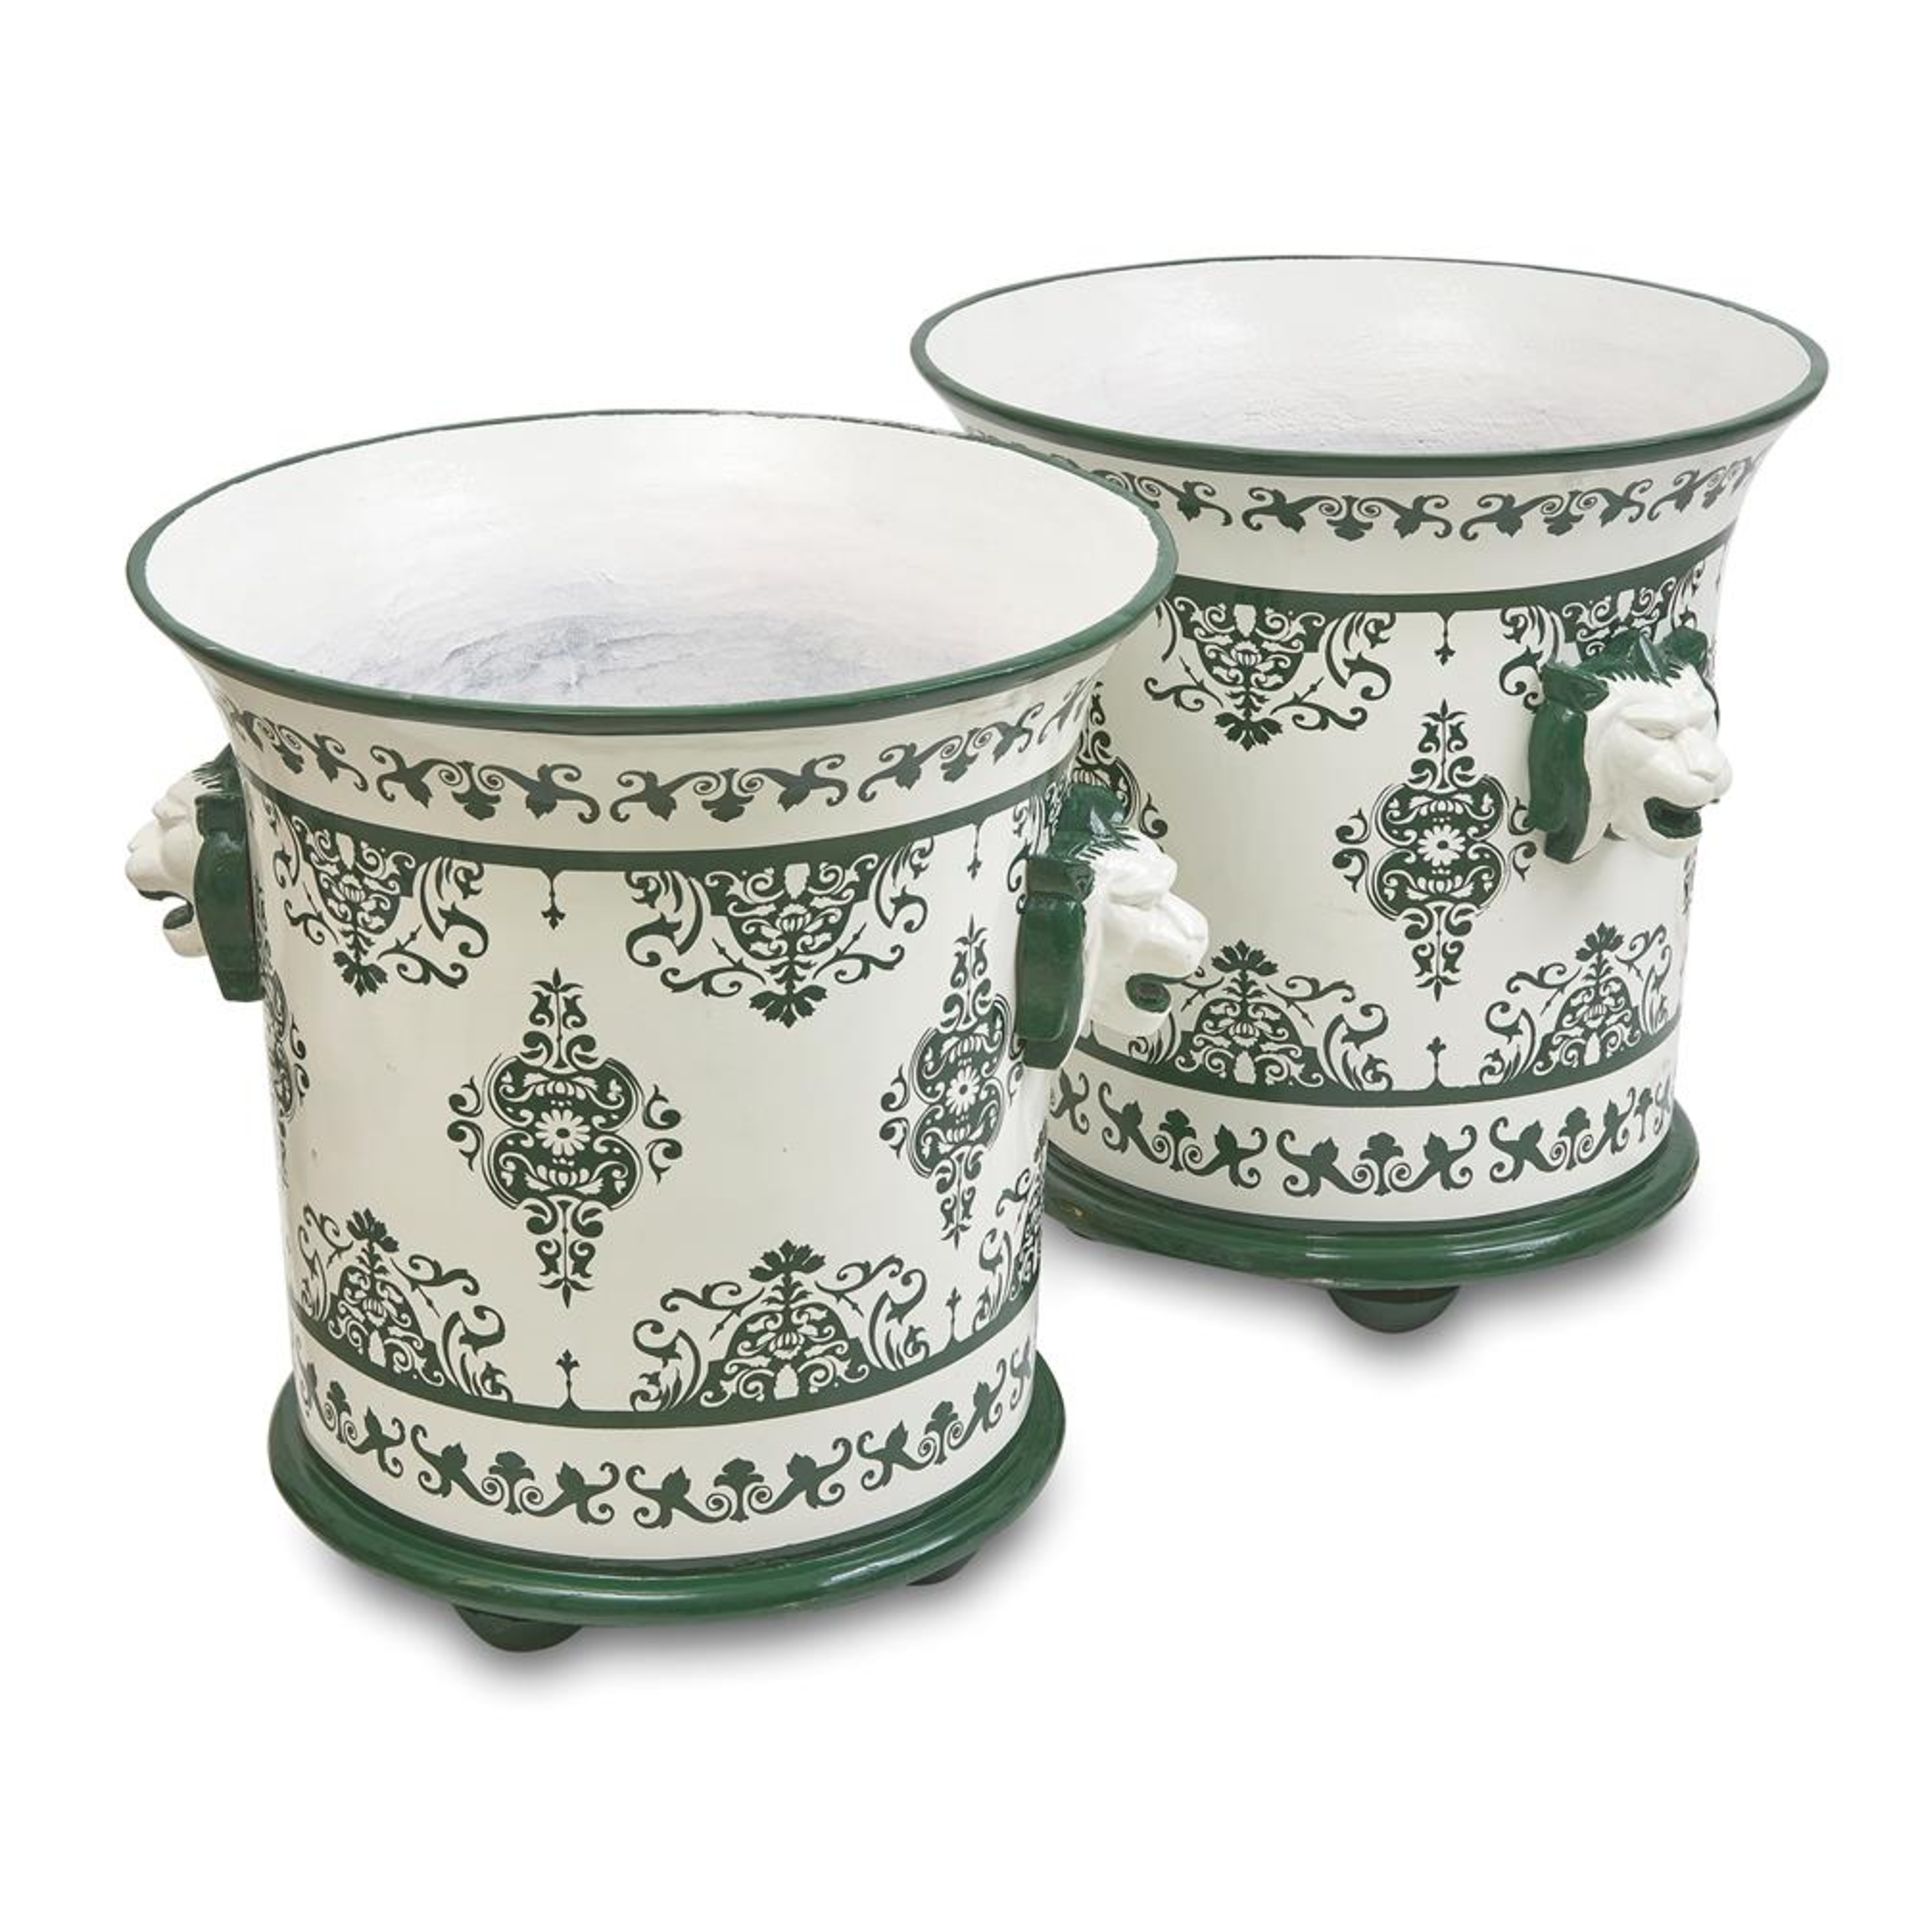 A PAIR OF MODERN ENAMELLED-IRON ORANGERY URNS OF LARGE SIZE BY GUINEVERE